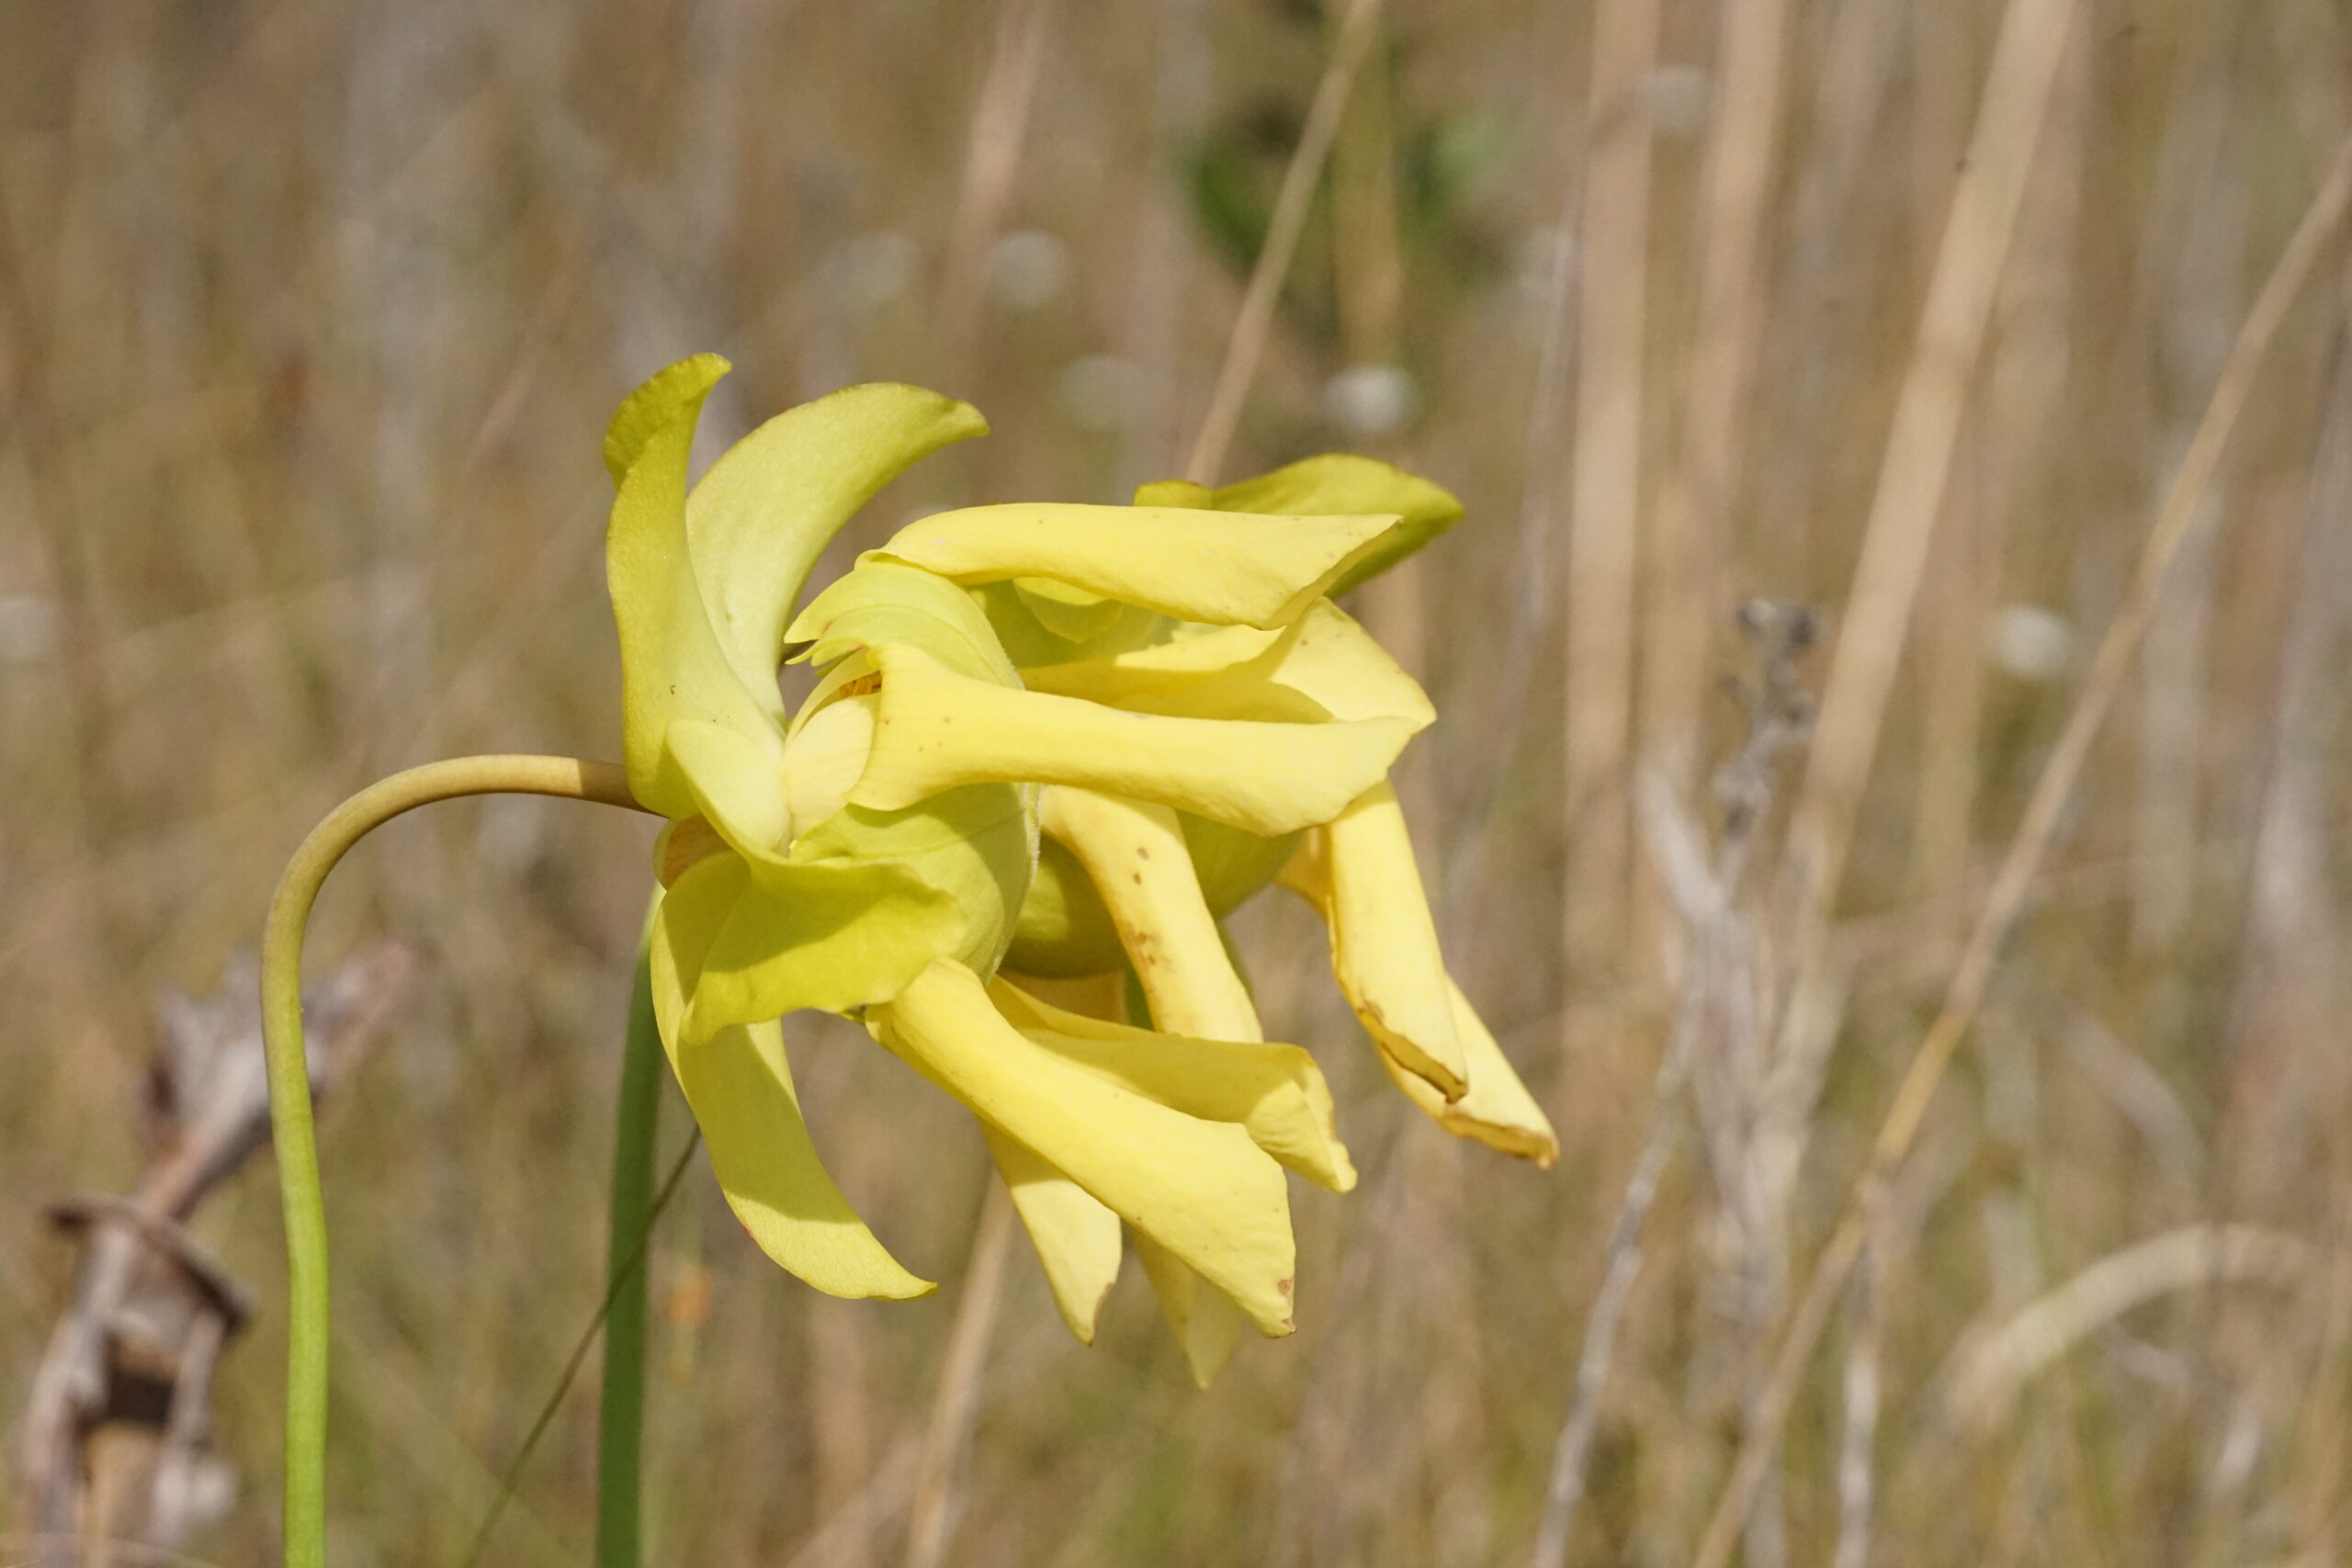 Yellow pitcher plant (Sarracenia flava) flowers by Emily Bell